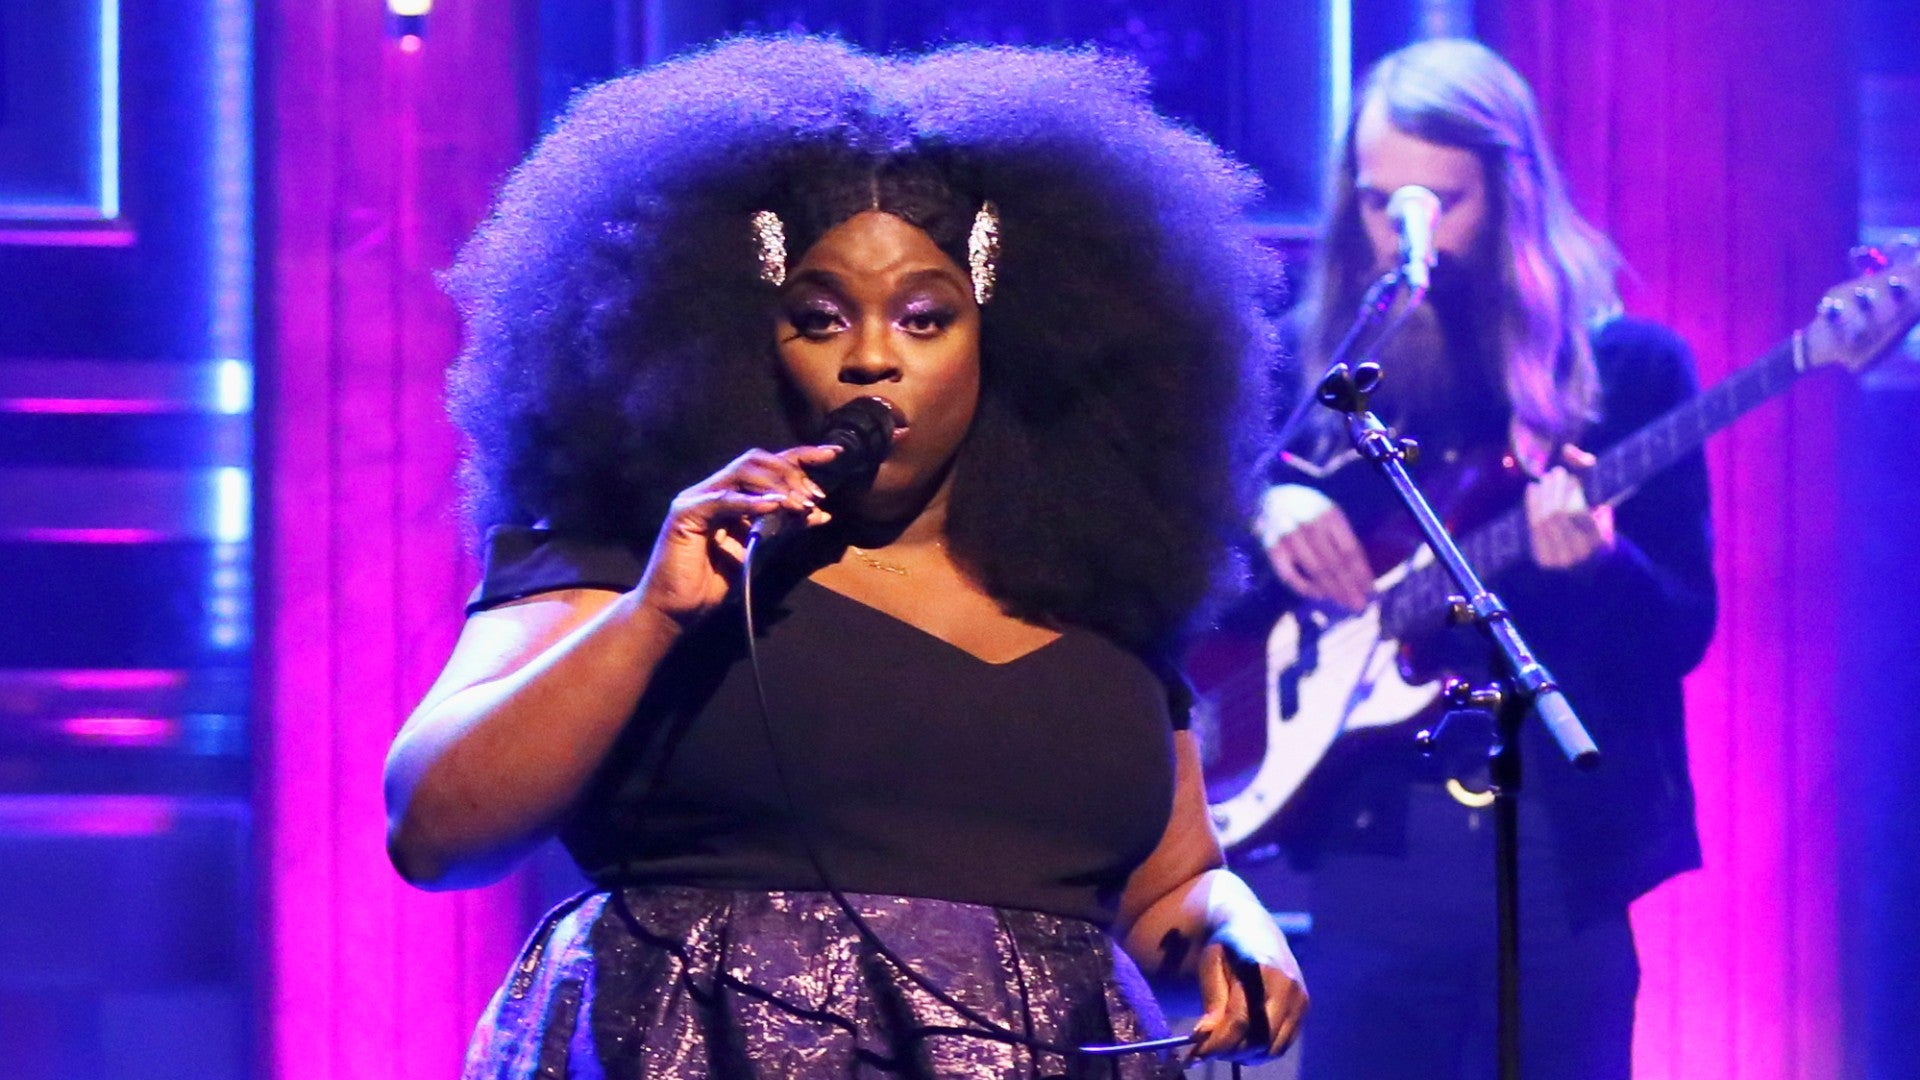 Yola Invokes Our Favorite Natural Beauties On ‘The Tonight Show’